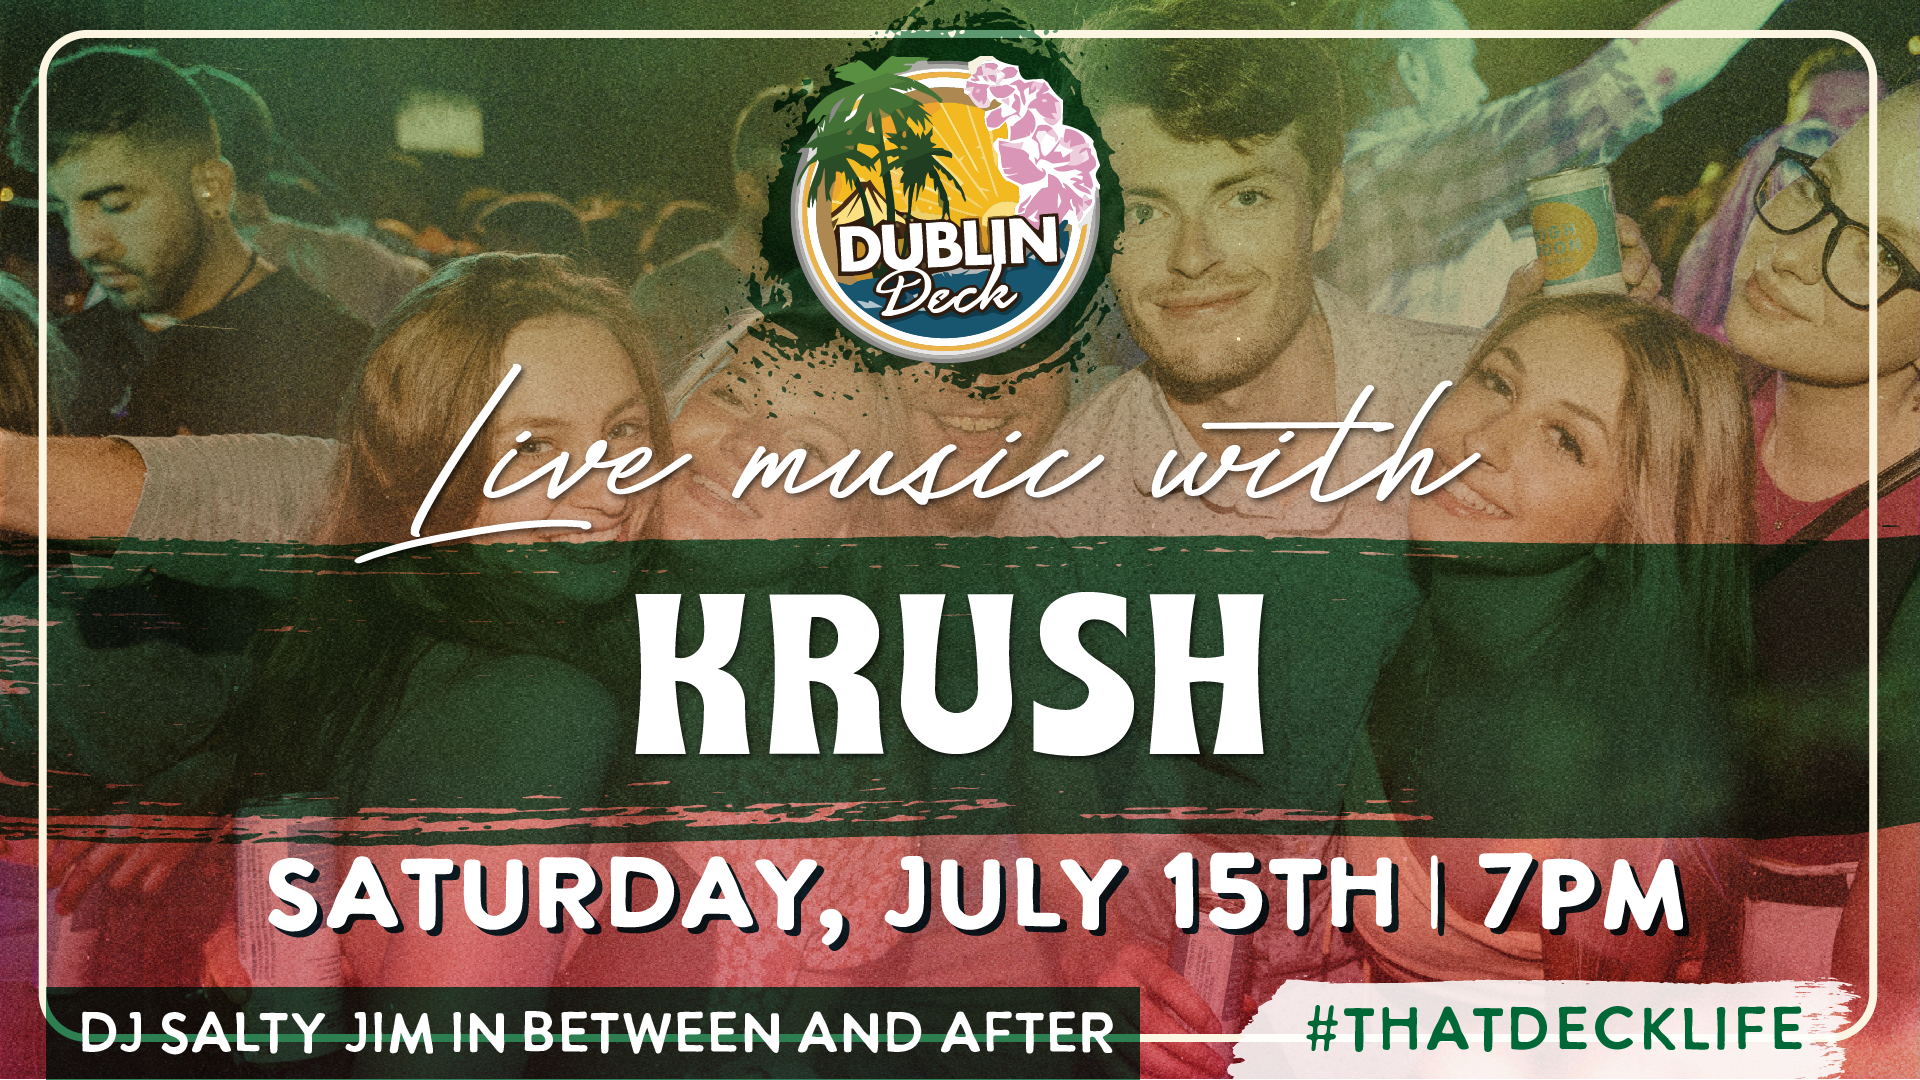 Jam out with Krush at Dublin Deck! Music starts at 7PM